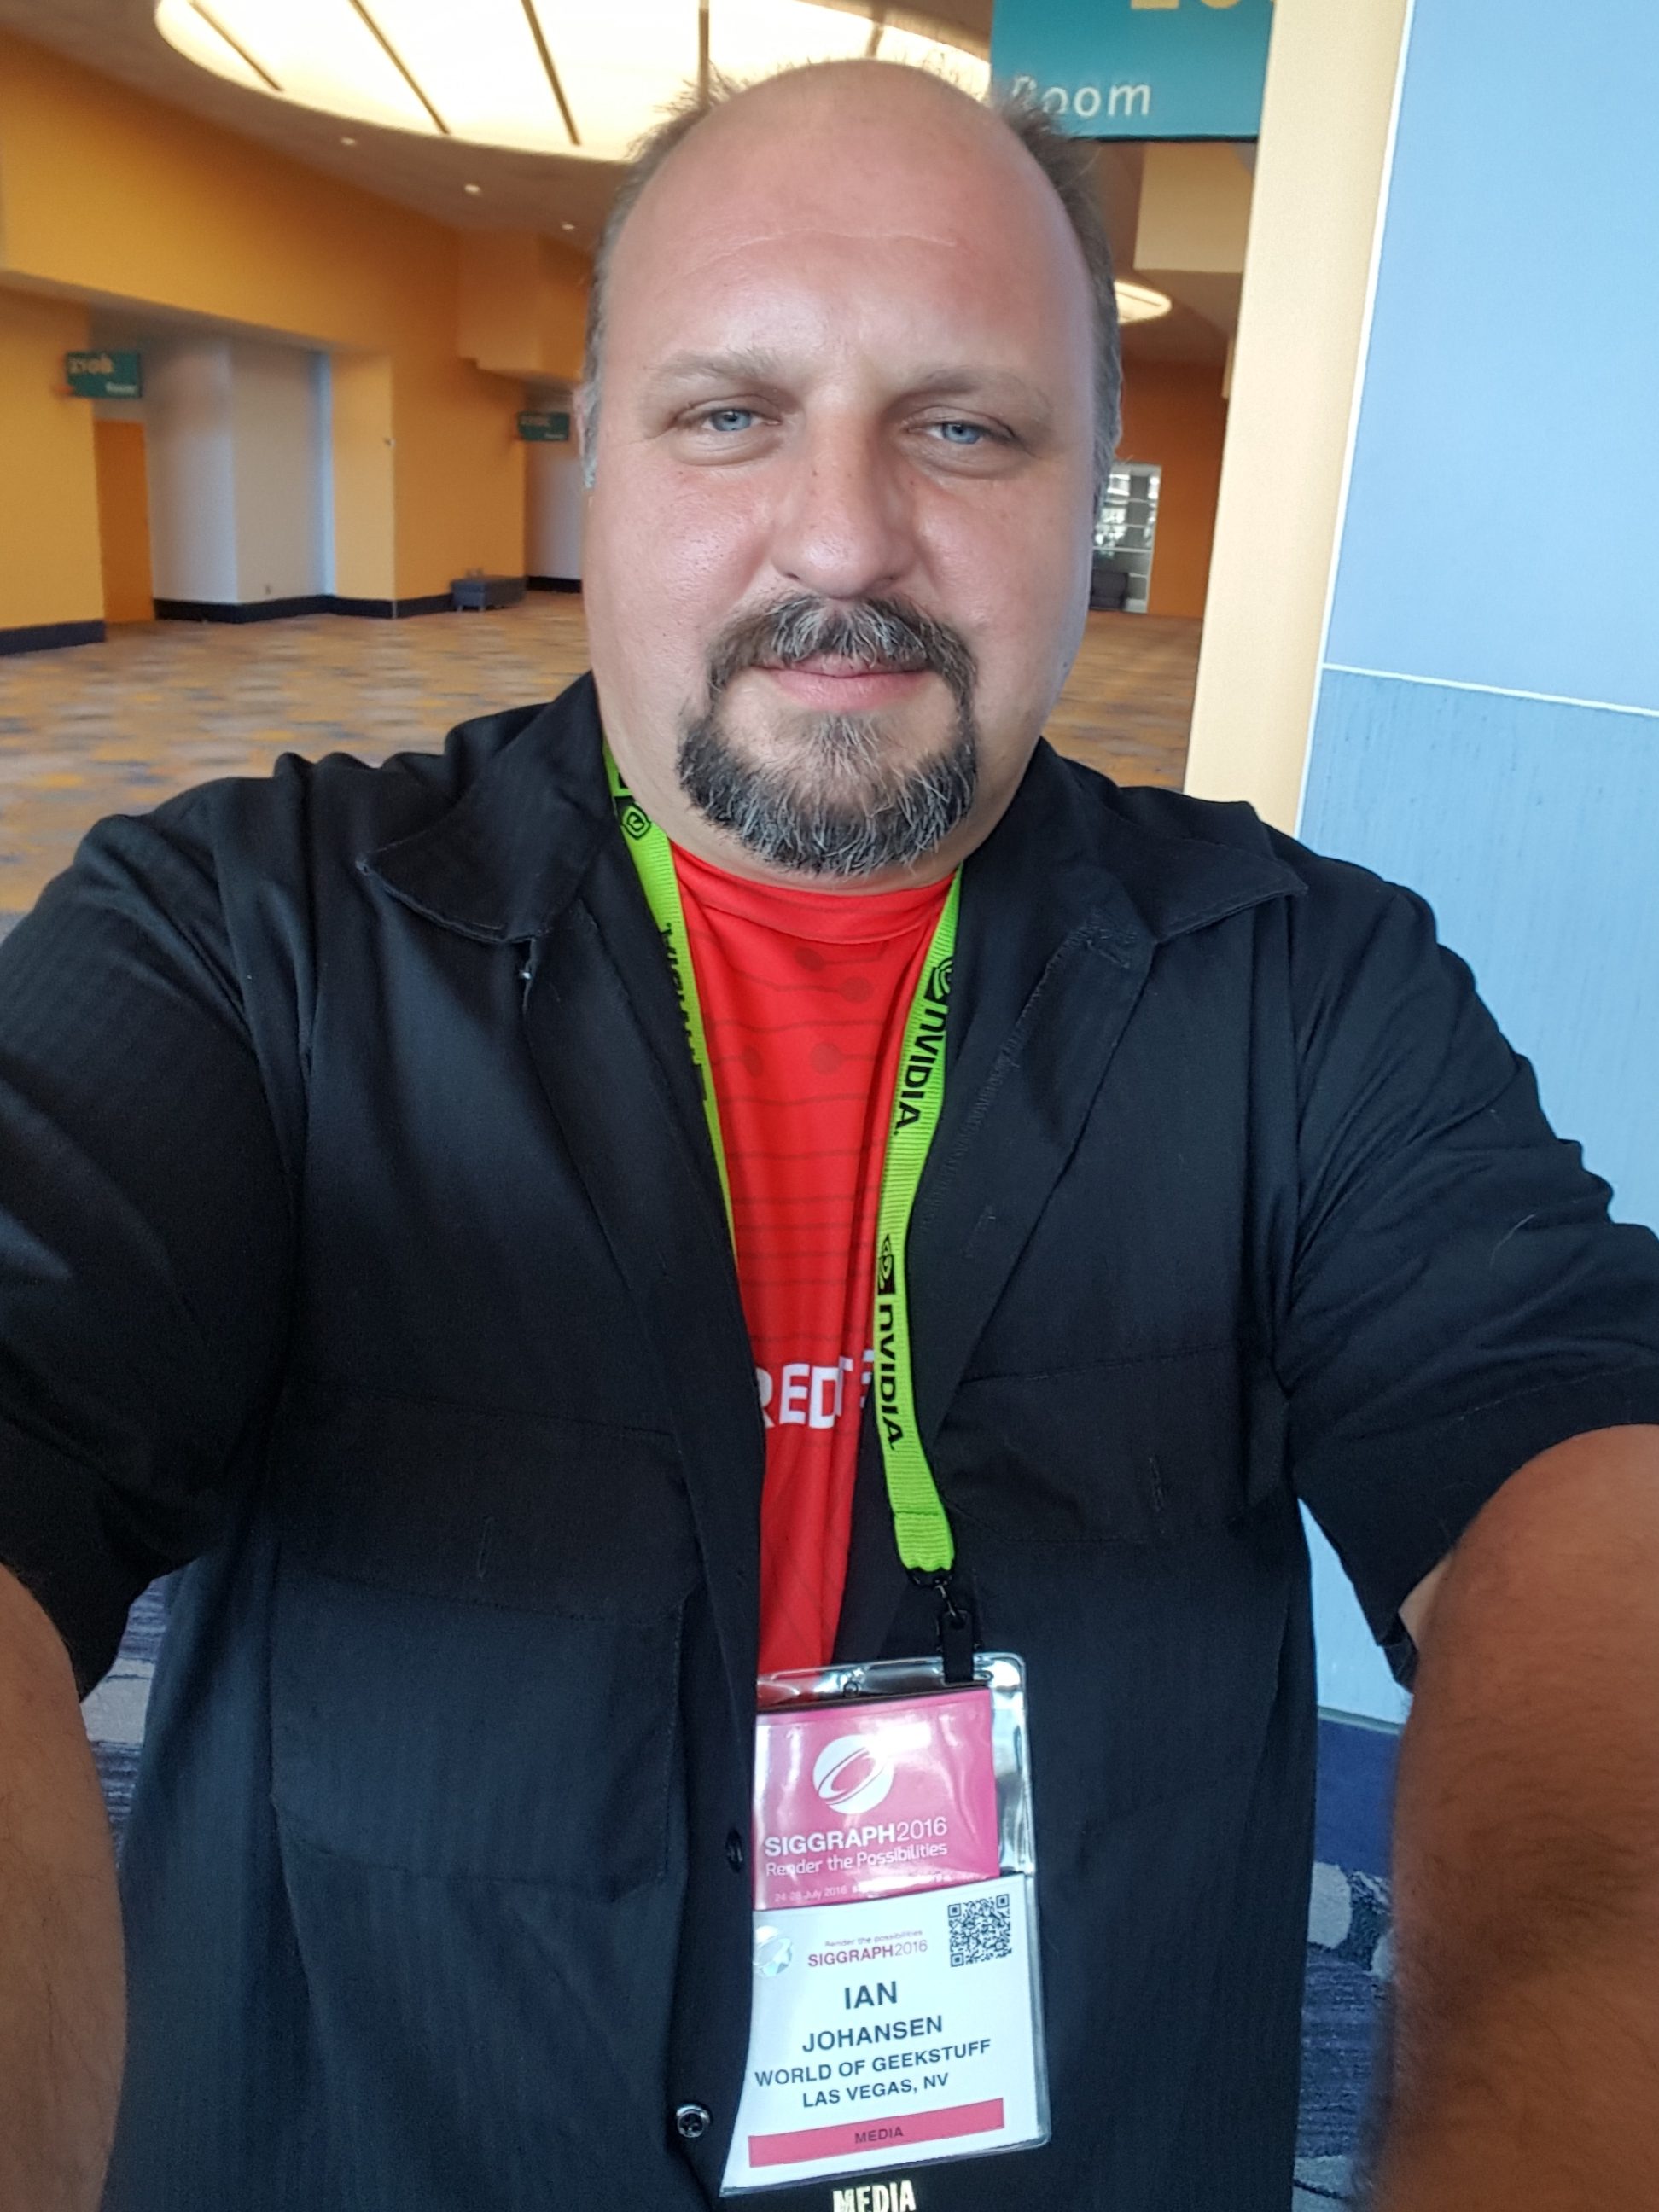 Decked out with my Siggraph pass and ready to hit the show floor! 